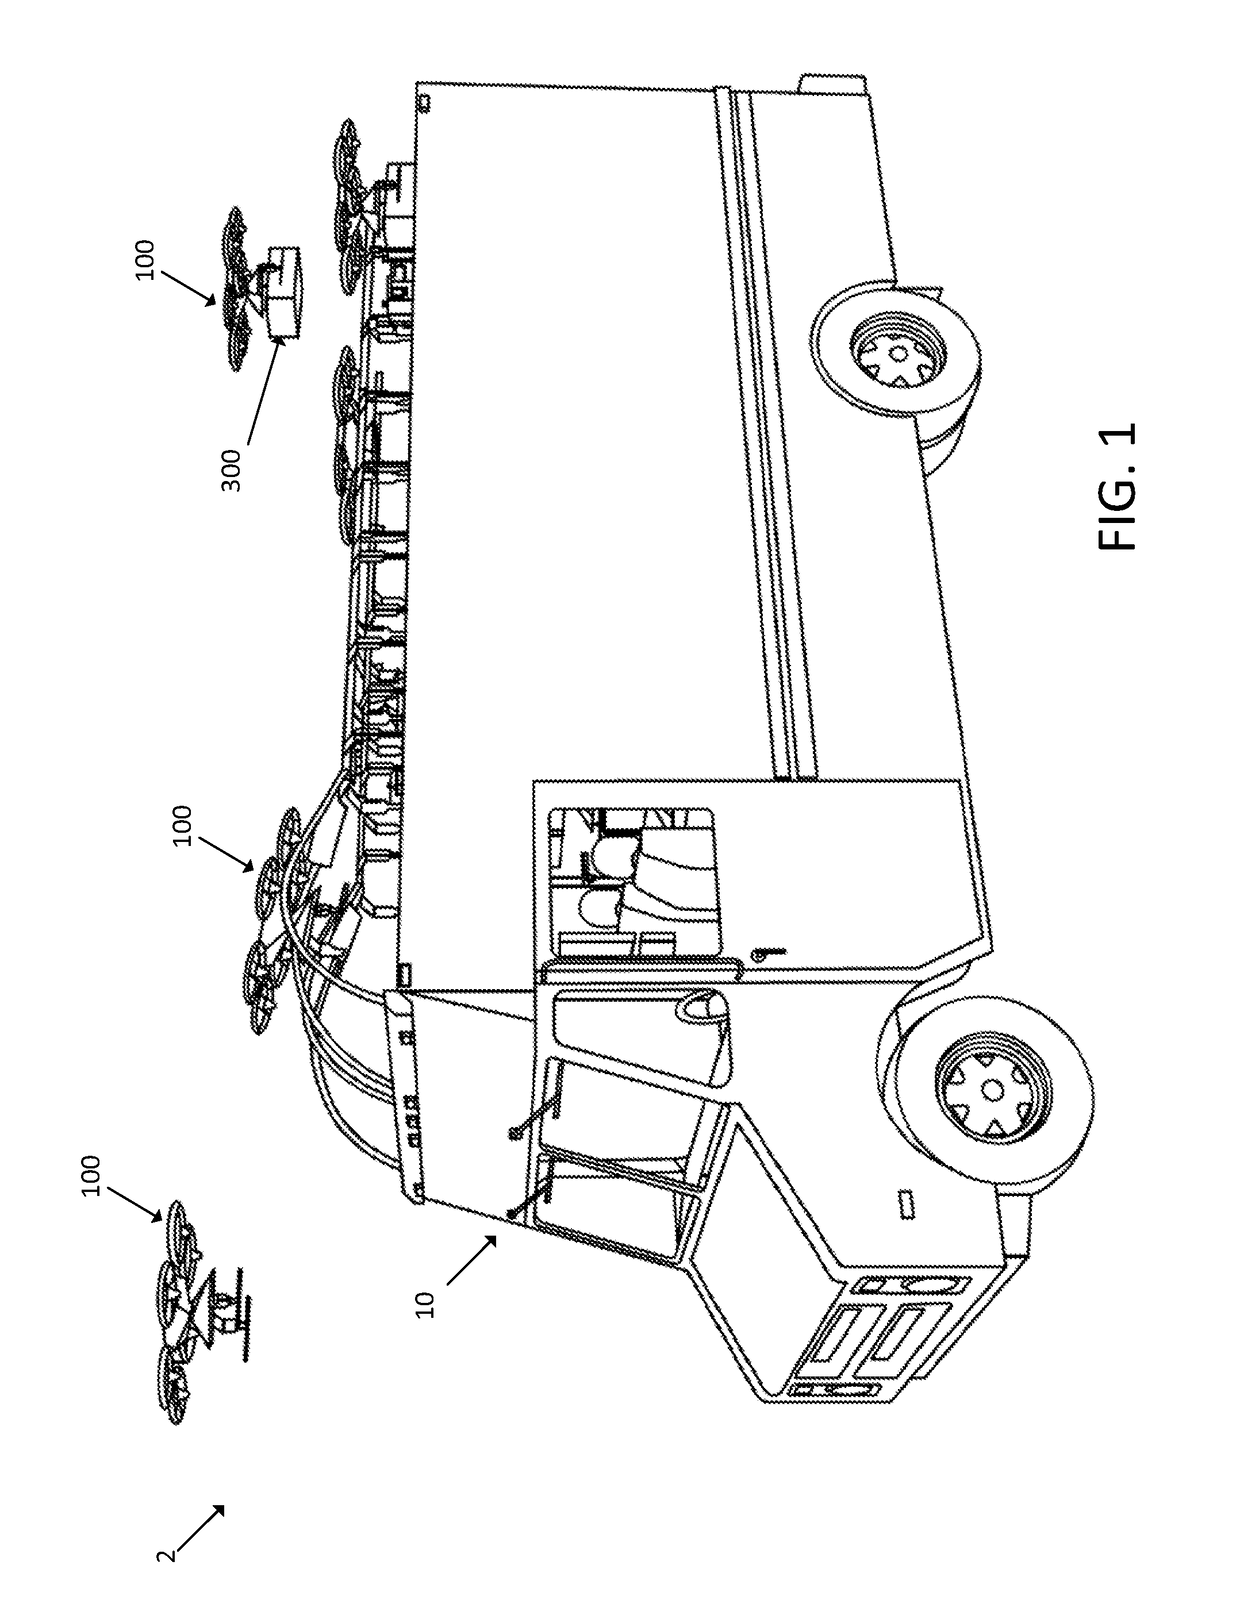 Unmanned aerial vehicle including a removable parcel carrier